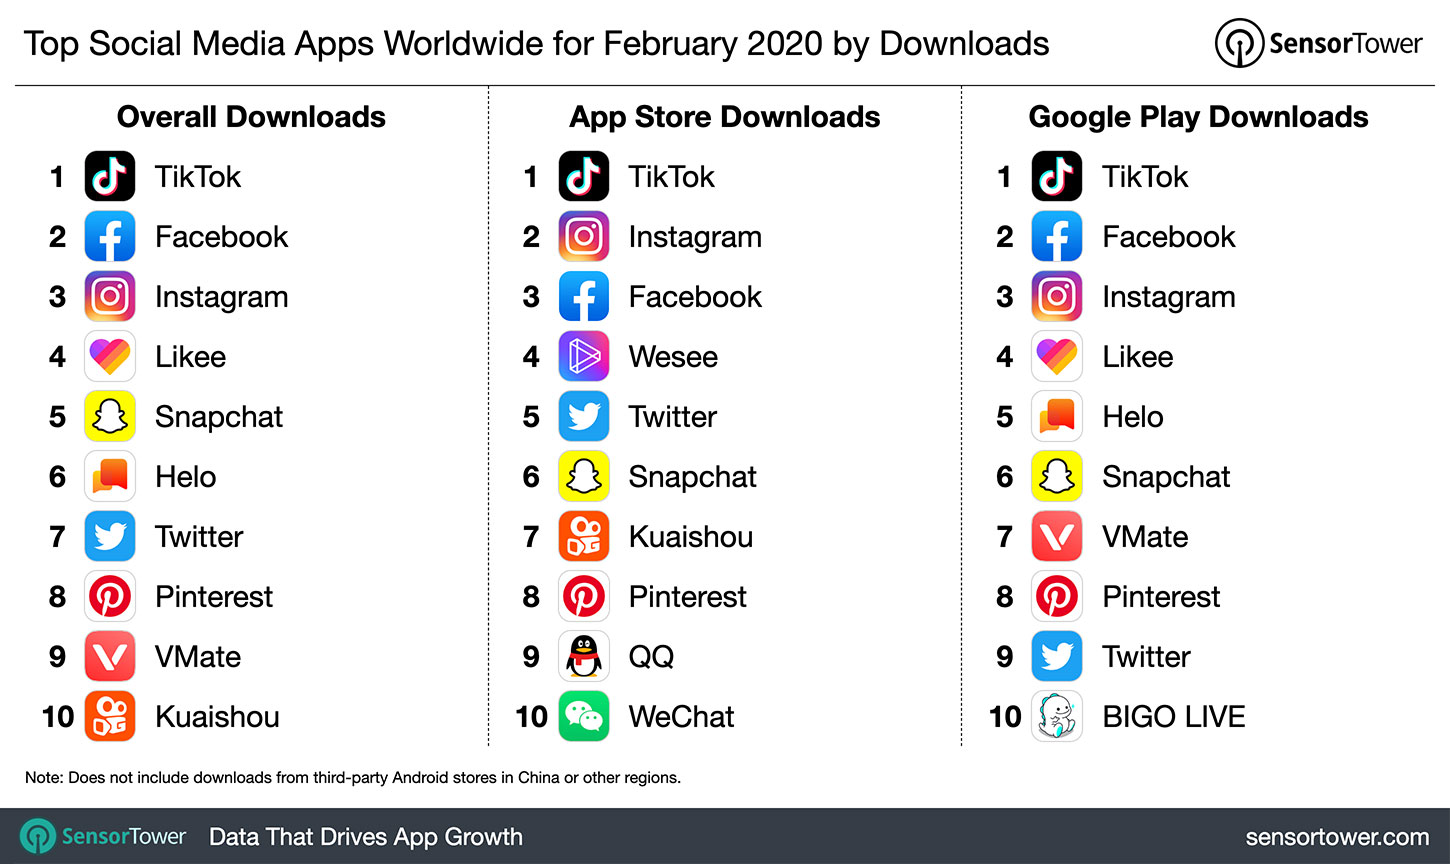 Top Social Media Apps Worldwide for February 2020 by Downloads